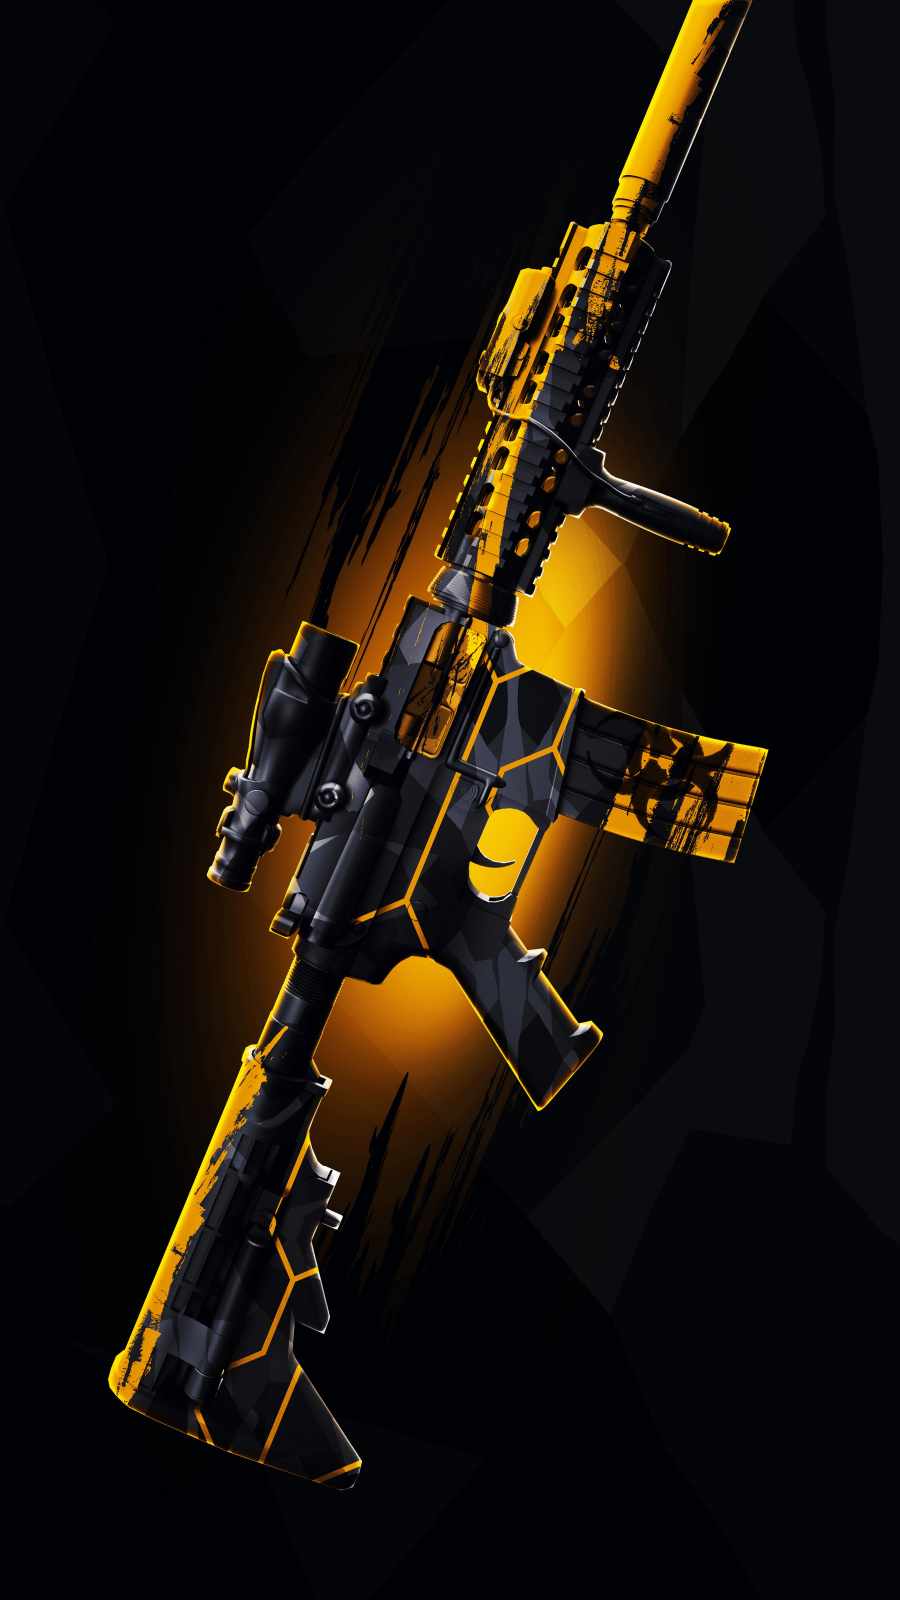 PUBG Rifle Skin IPhone Wallpaper - IPhone Wallpapers : iPhone Wallpapers